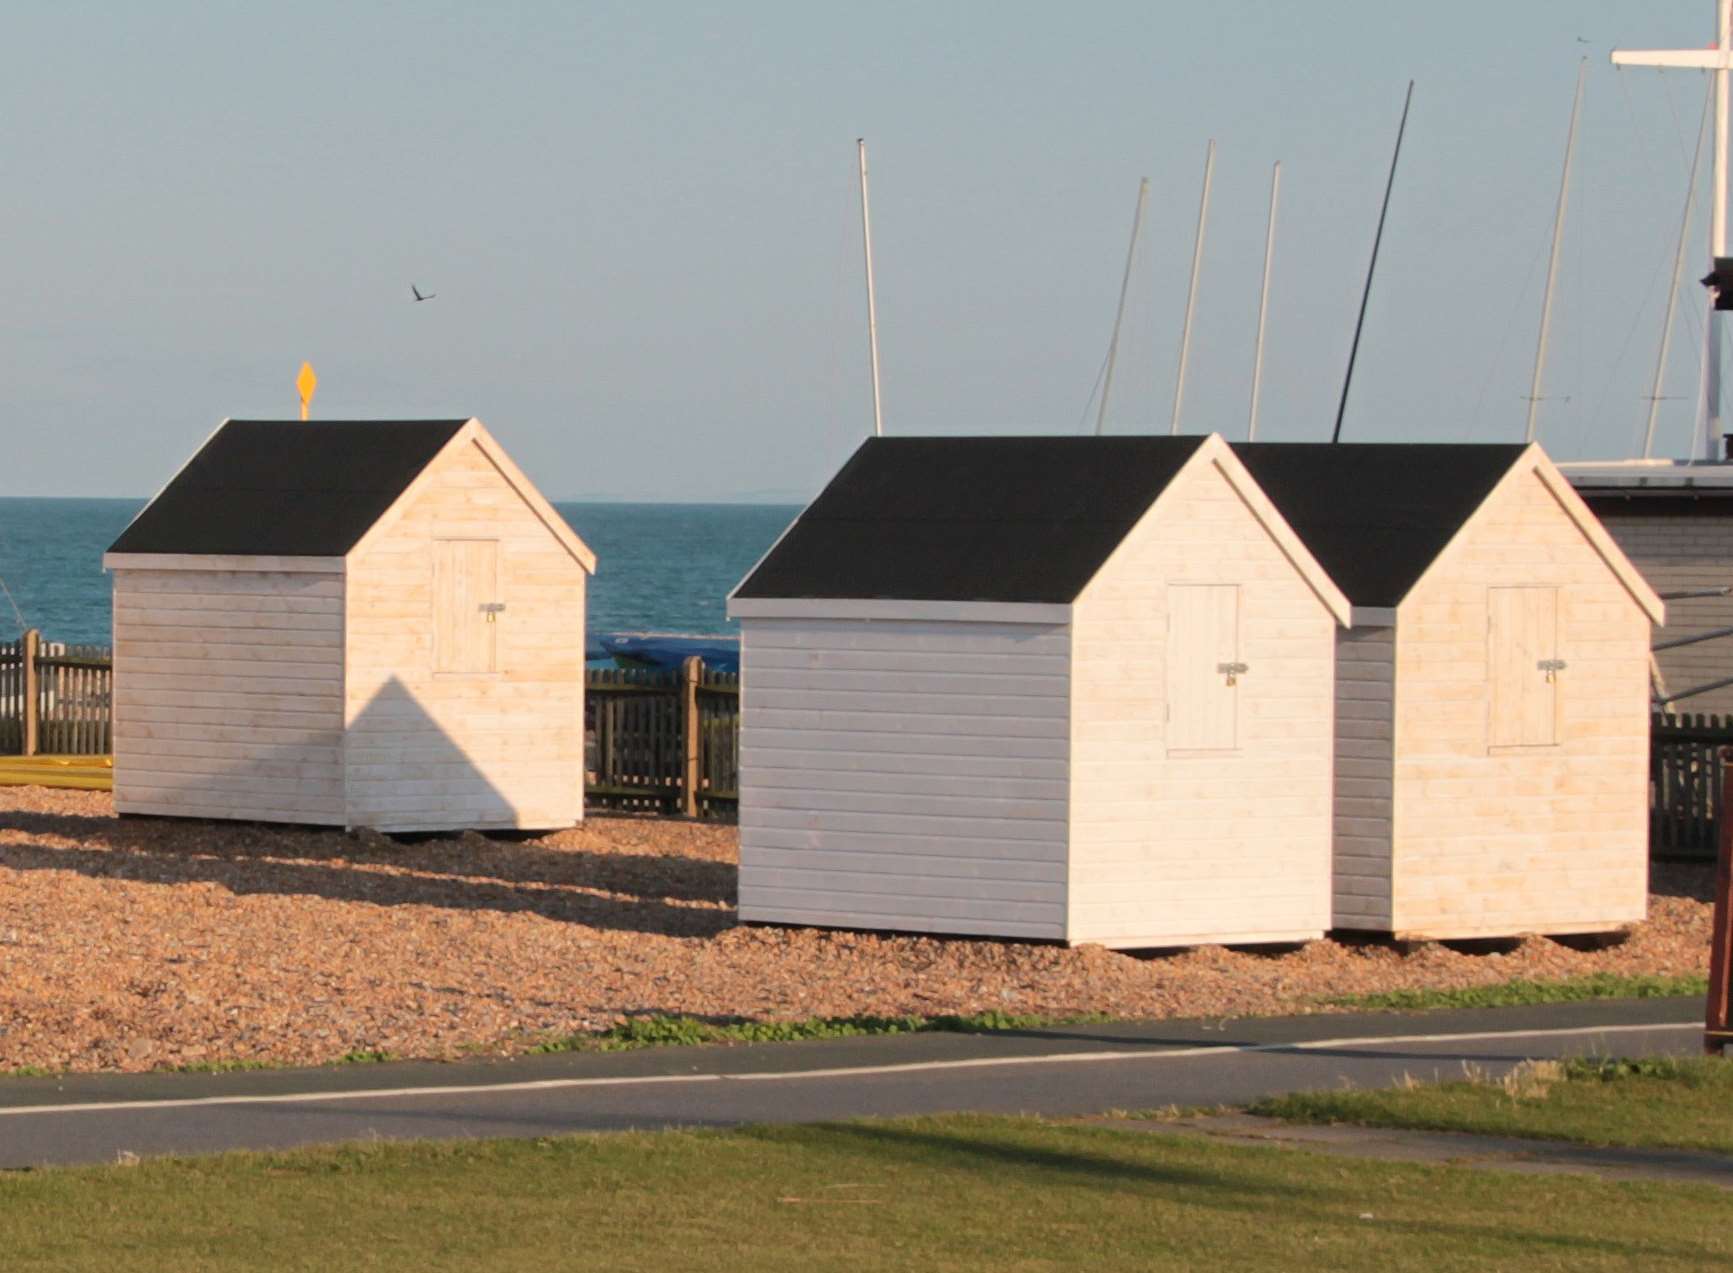 The new beach huts will be identical in design to those installed in 2014. Picture: Joanna Thomson